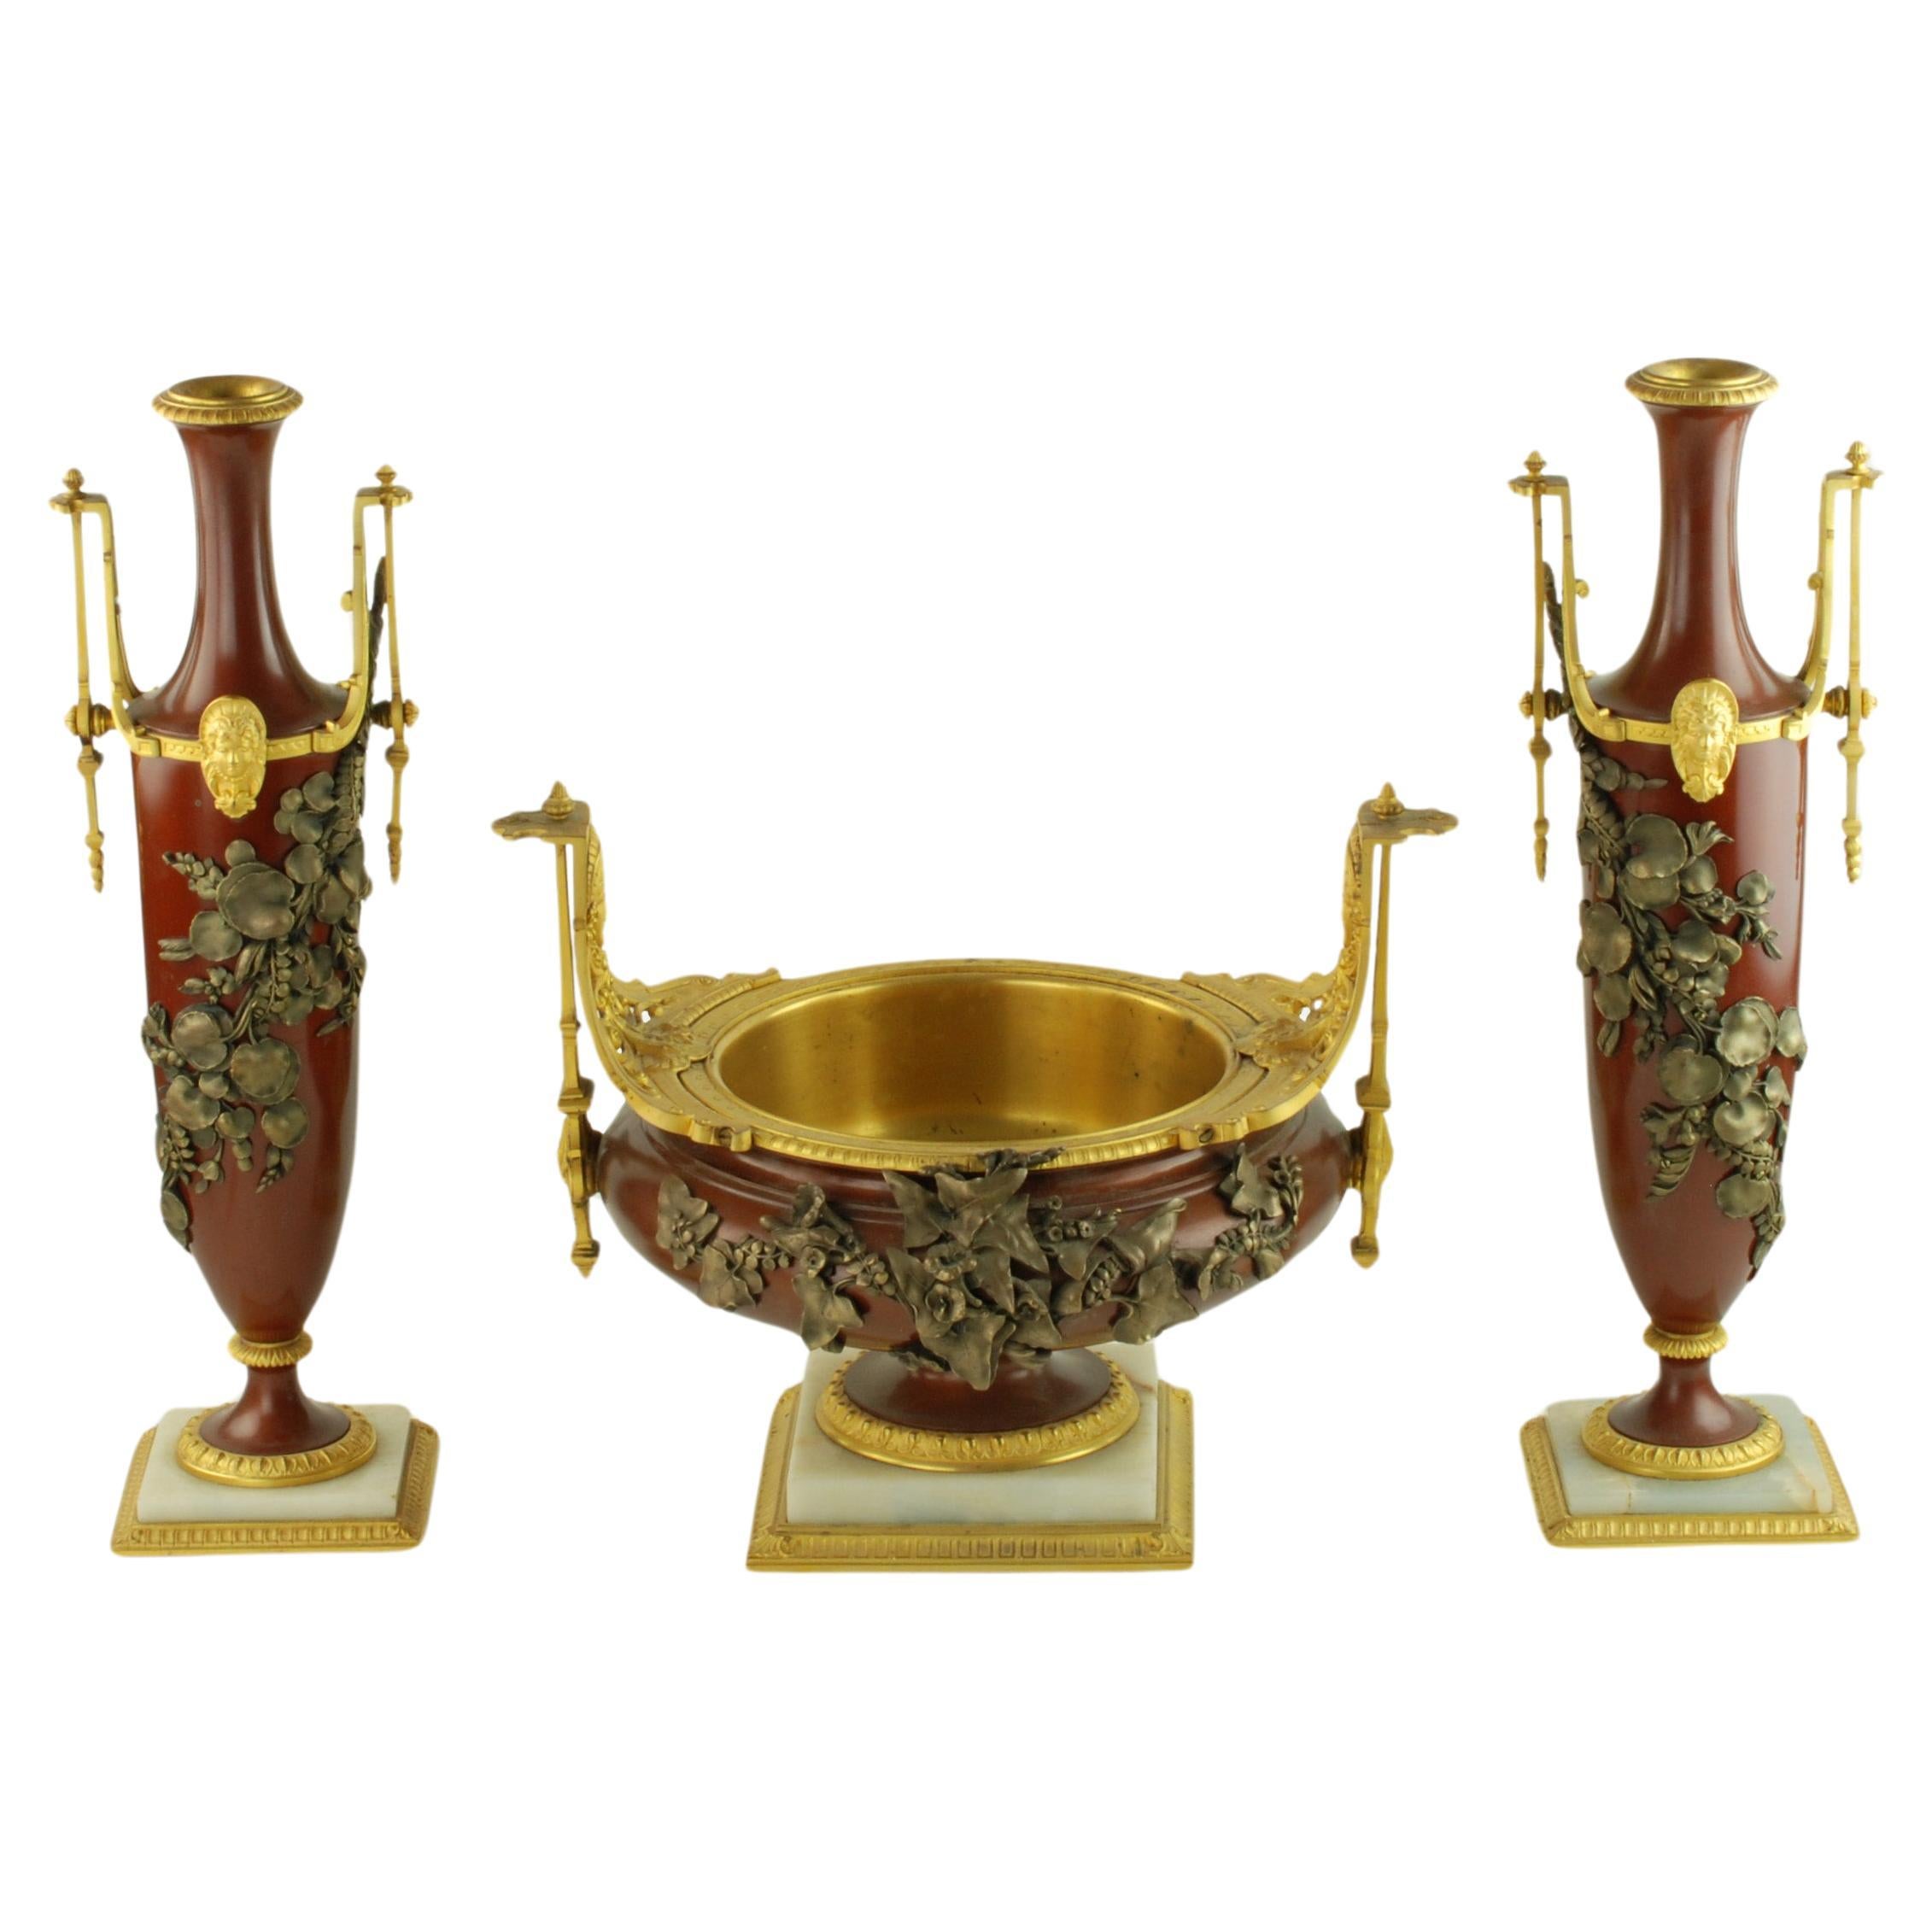 French Gilt & Patinated Bronze Garniture with Applied Foliate/Floral Decoration